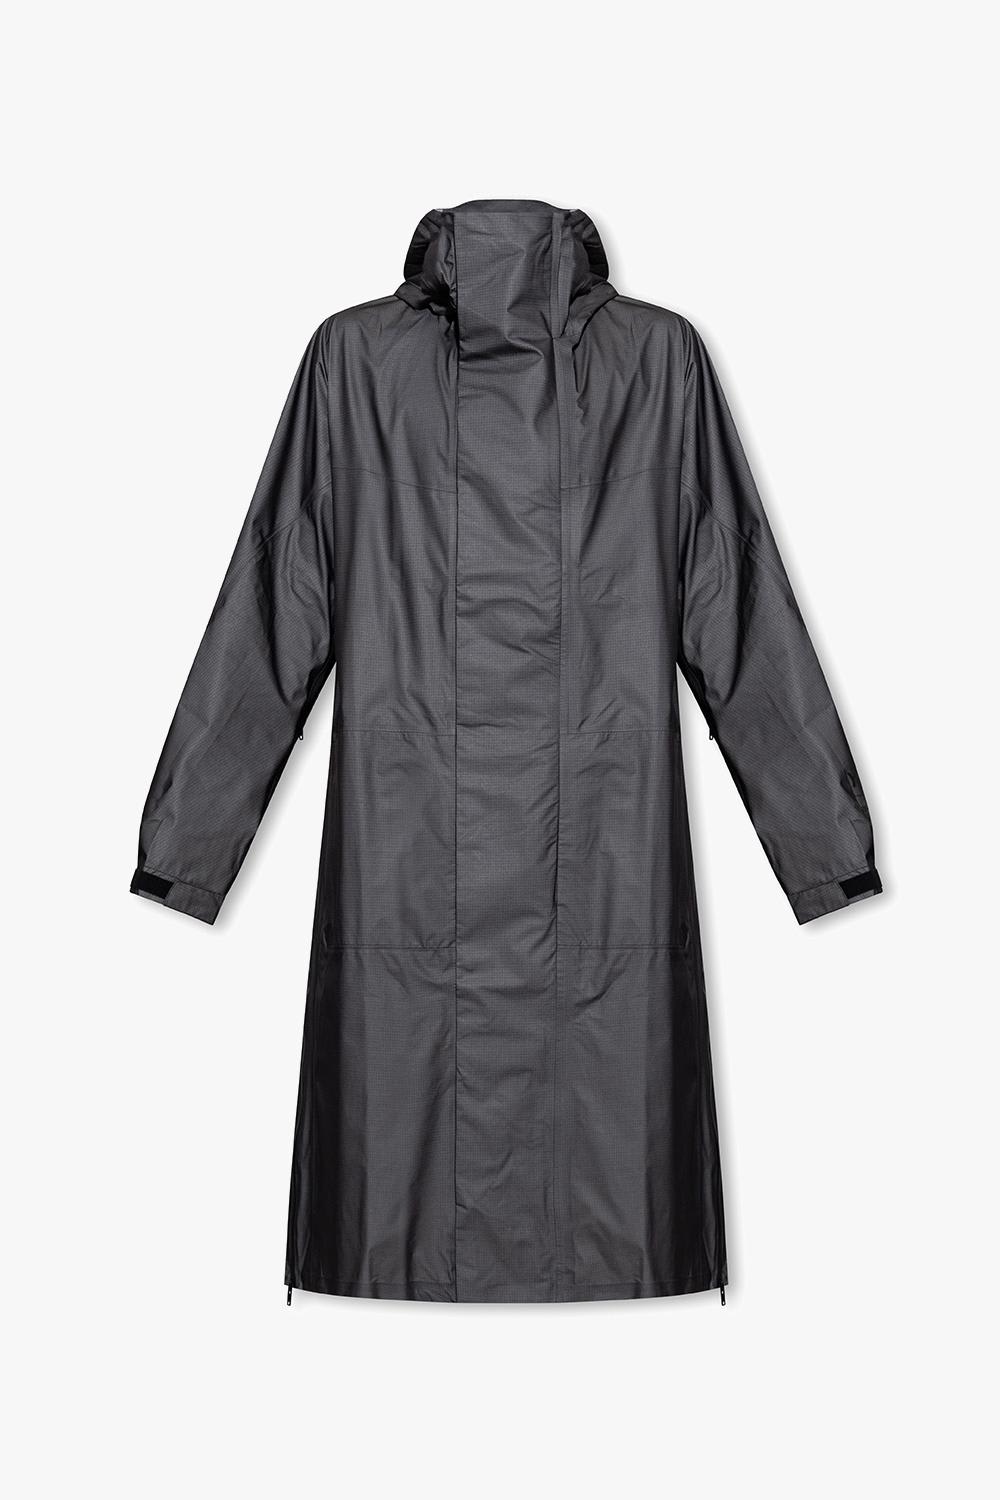 Y-3 HOODED PARKA